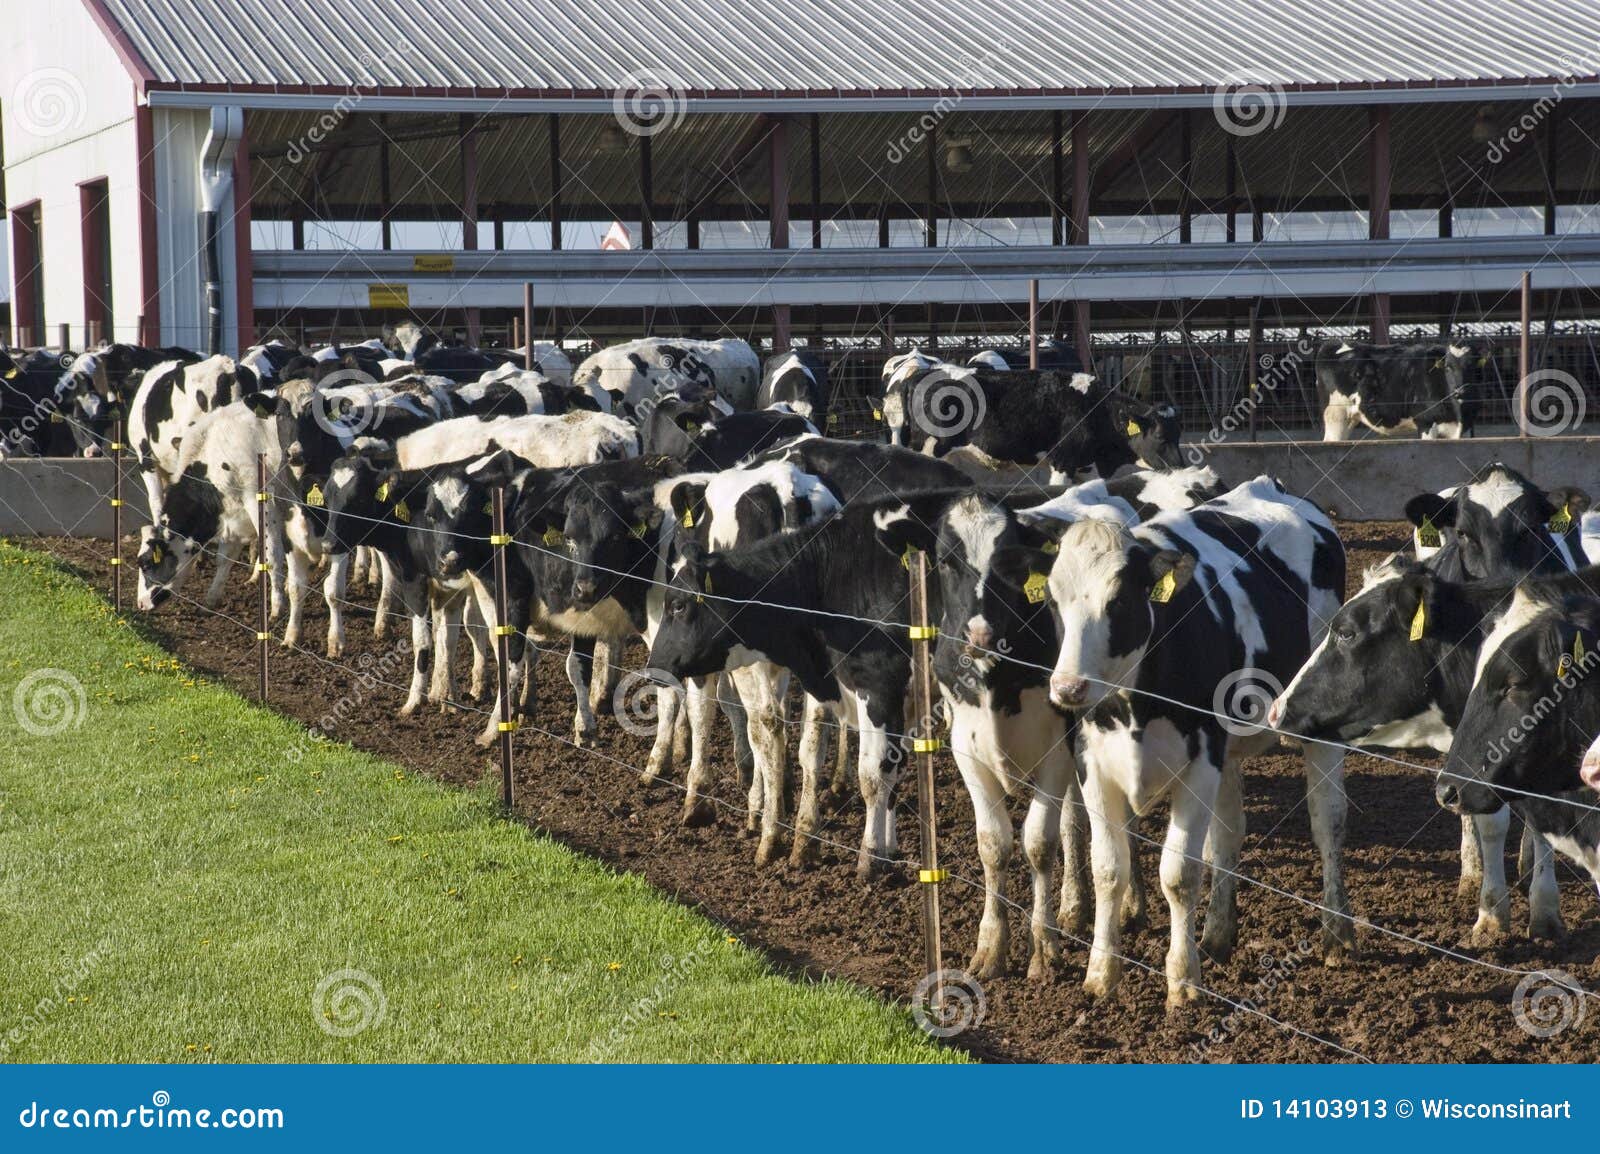 modern corporate dairy farm, agriculture business